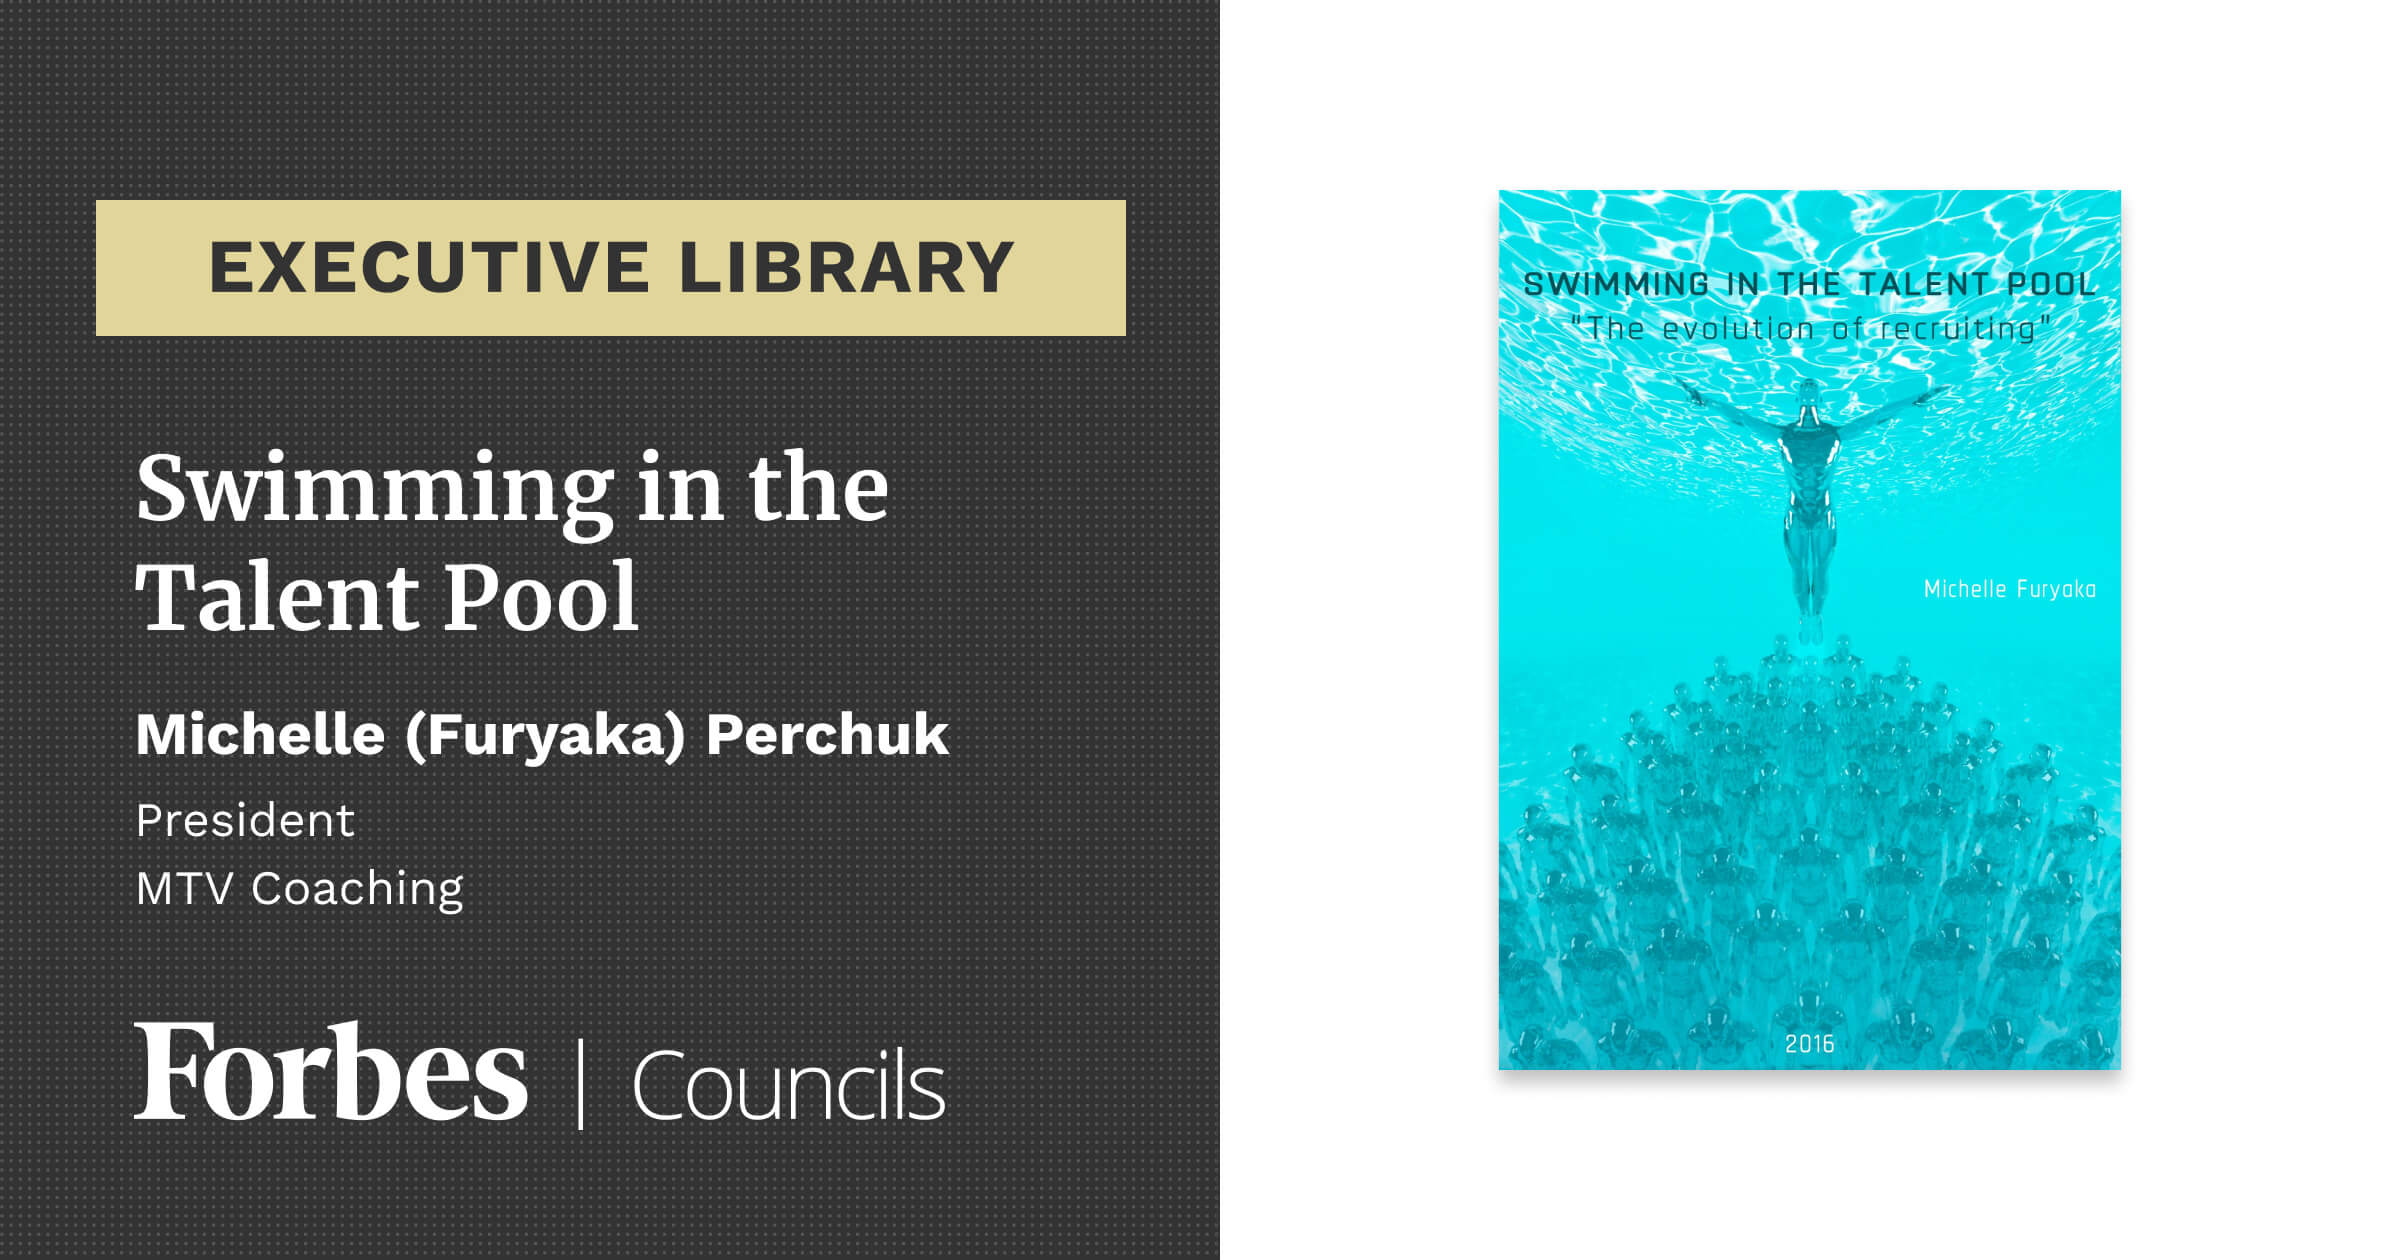 Swimming in the Talent Pool by Michelle Furyaka Perchuk